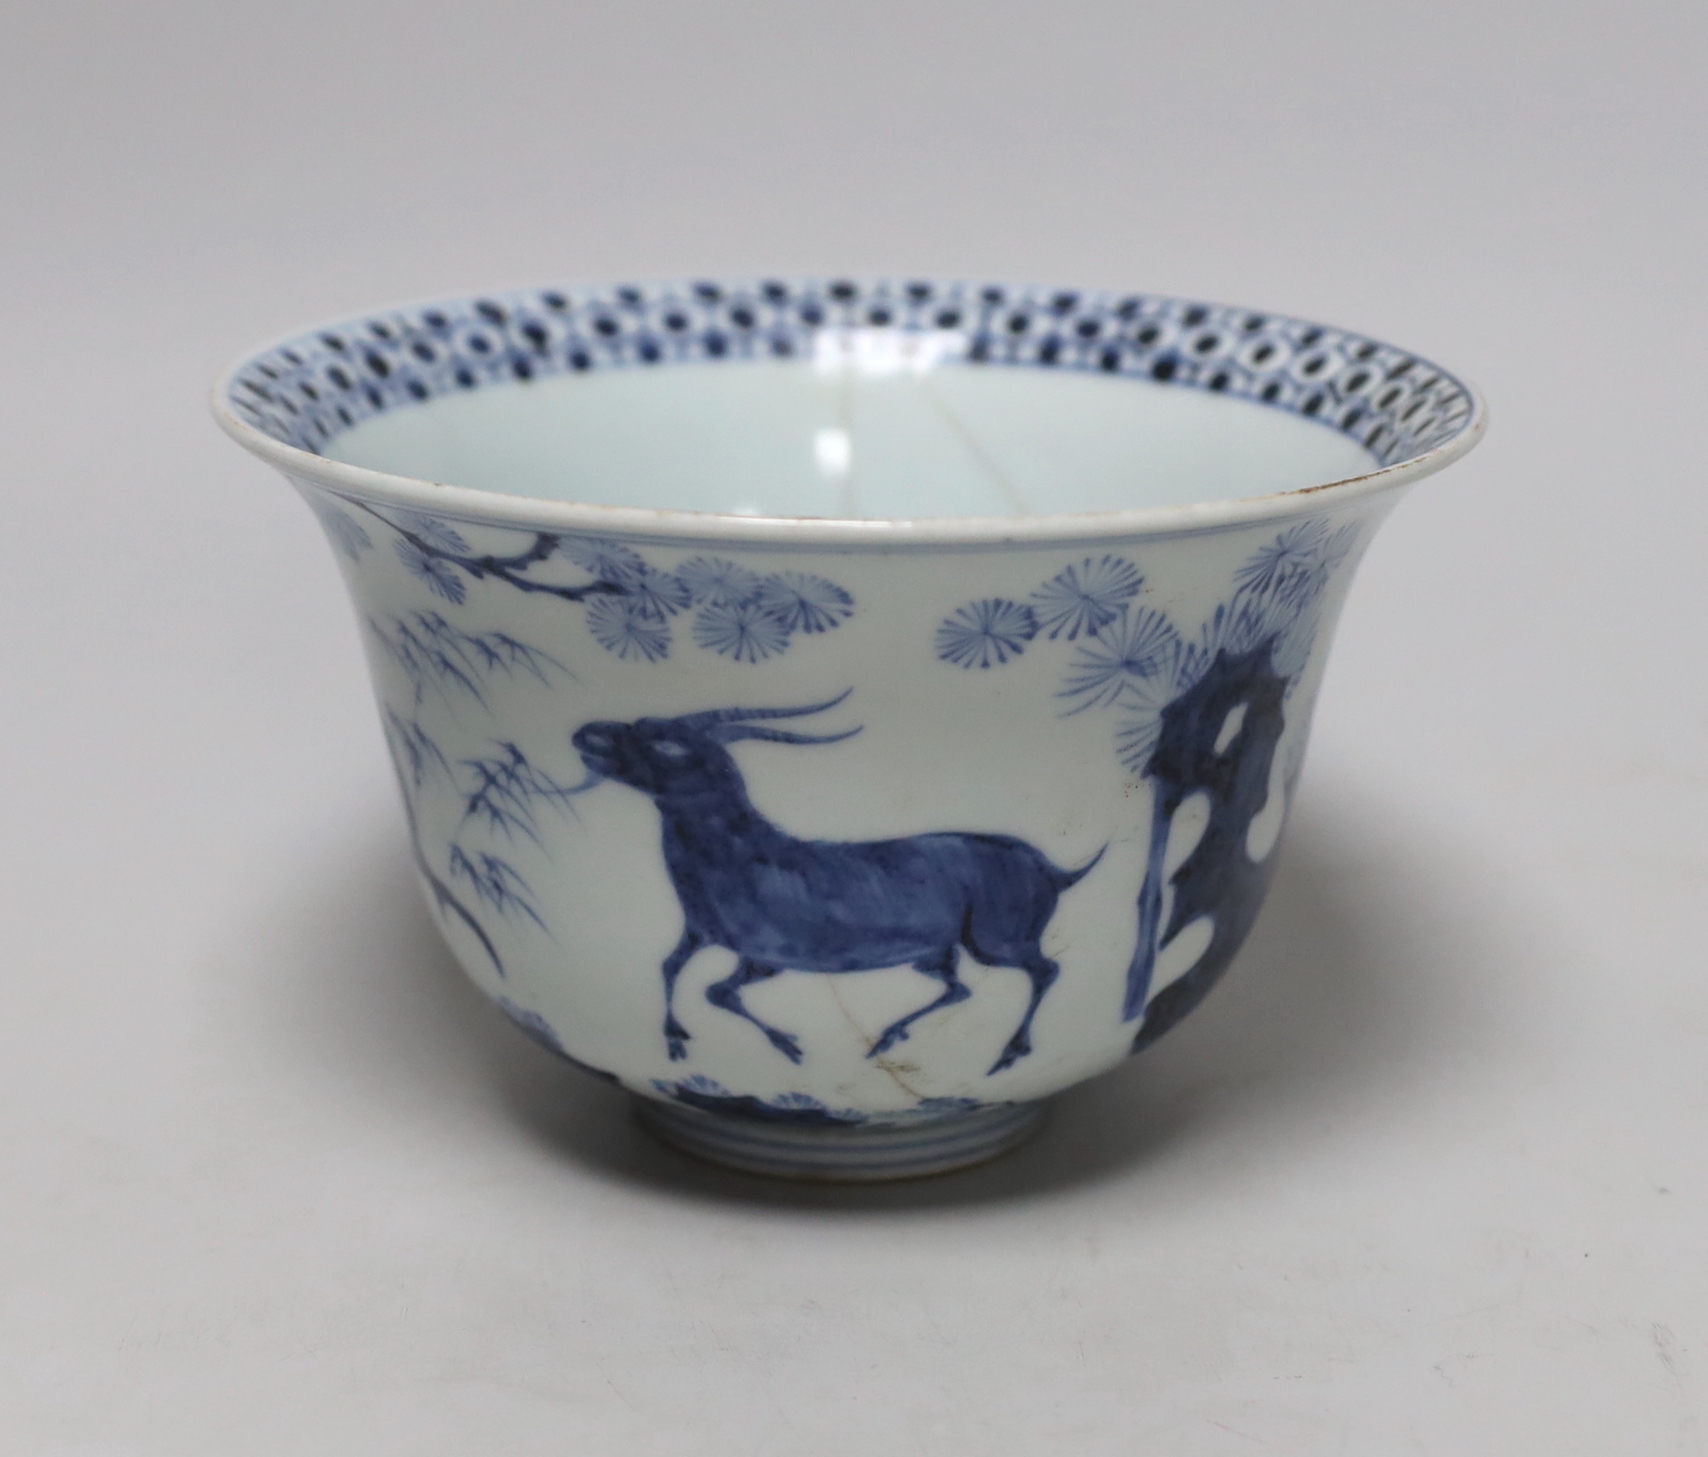 A Chinese blue and white footed bowl, decorated with animals in a landscape, 17cm in diameter